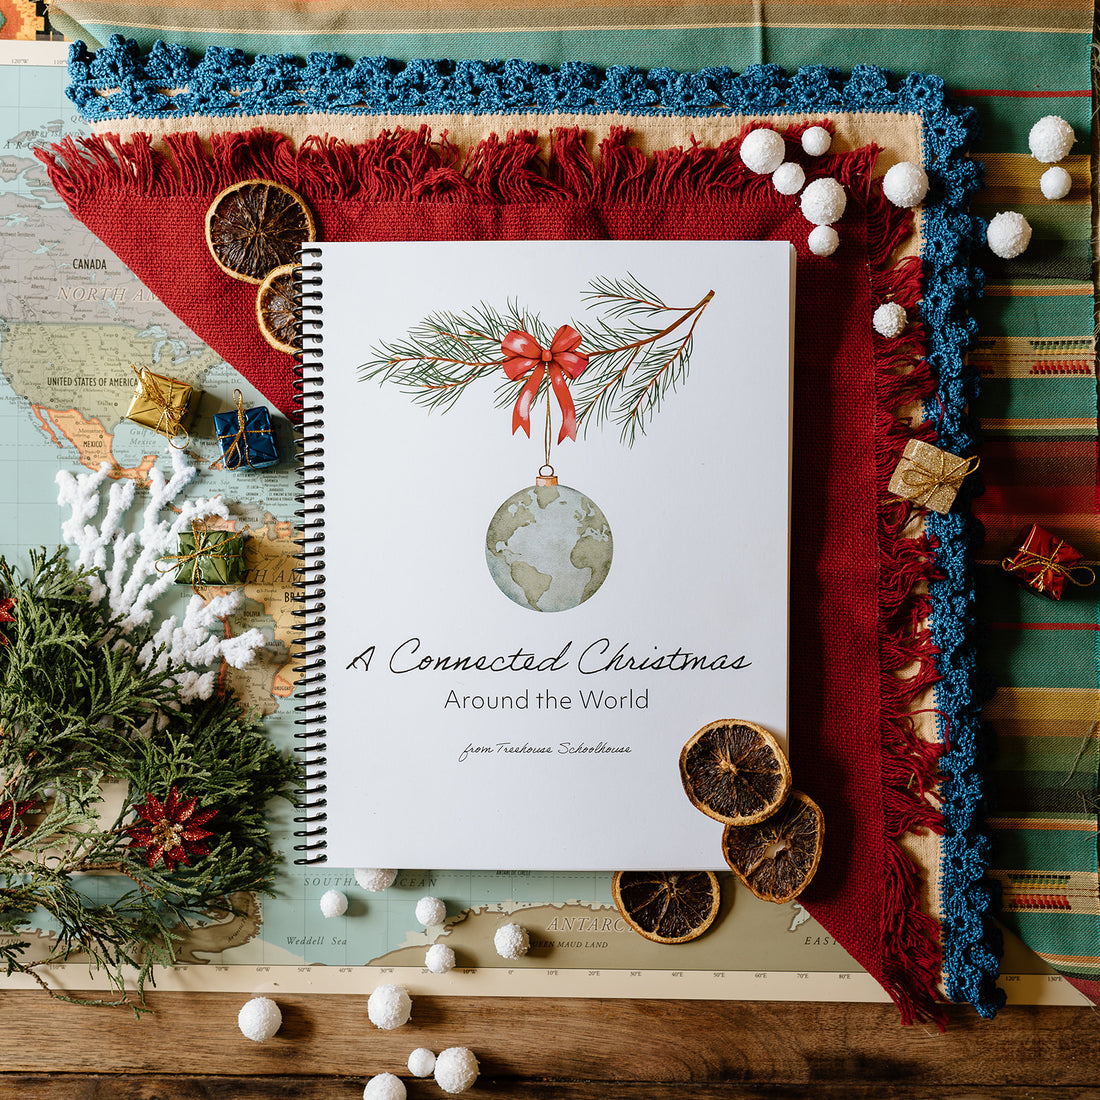 A Connected Christmas: Around the World